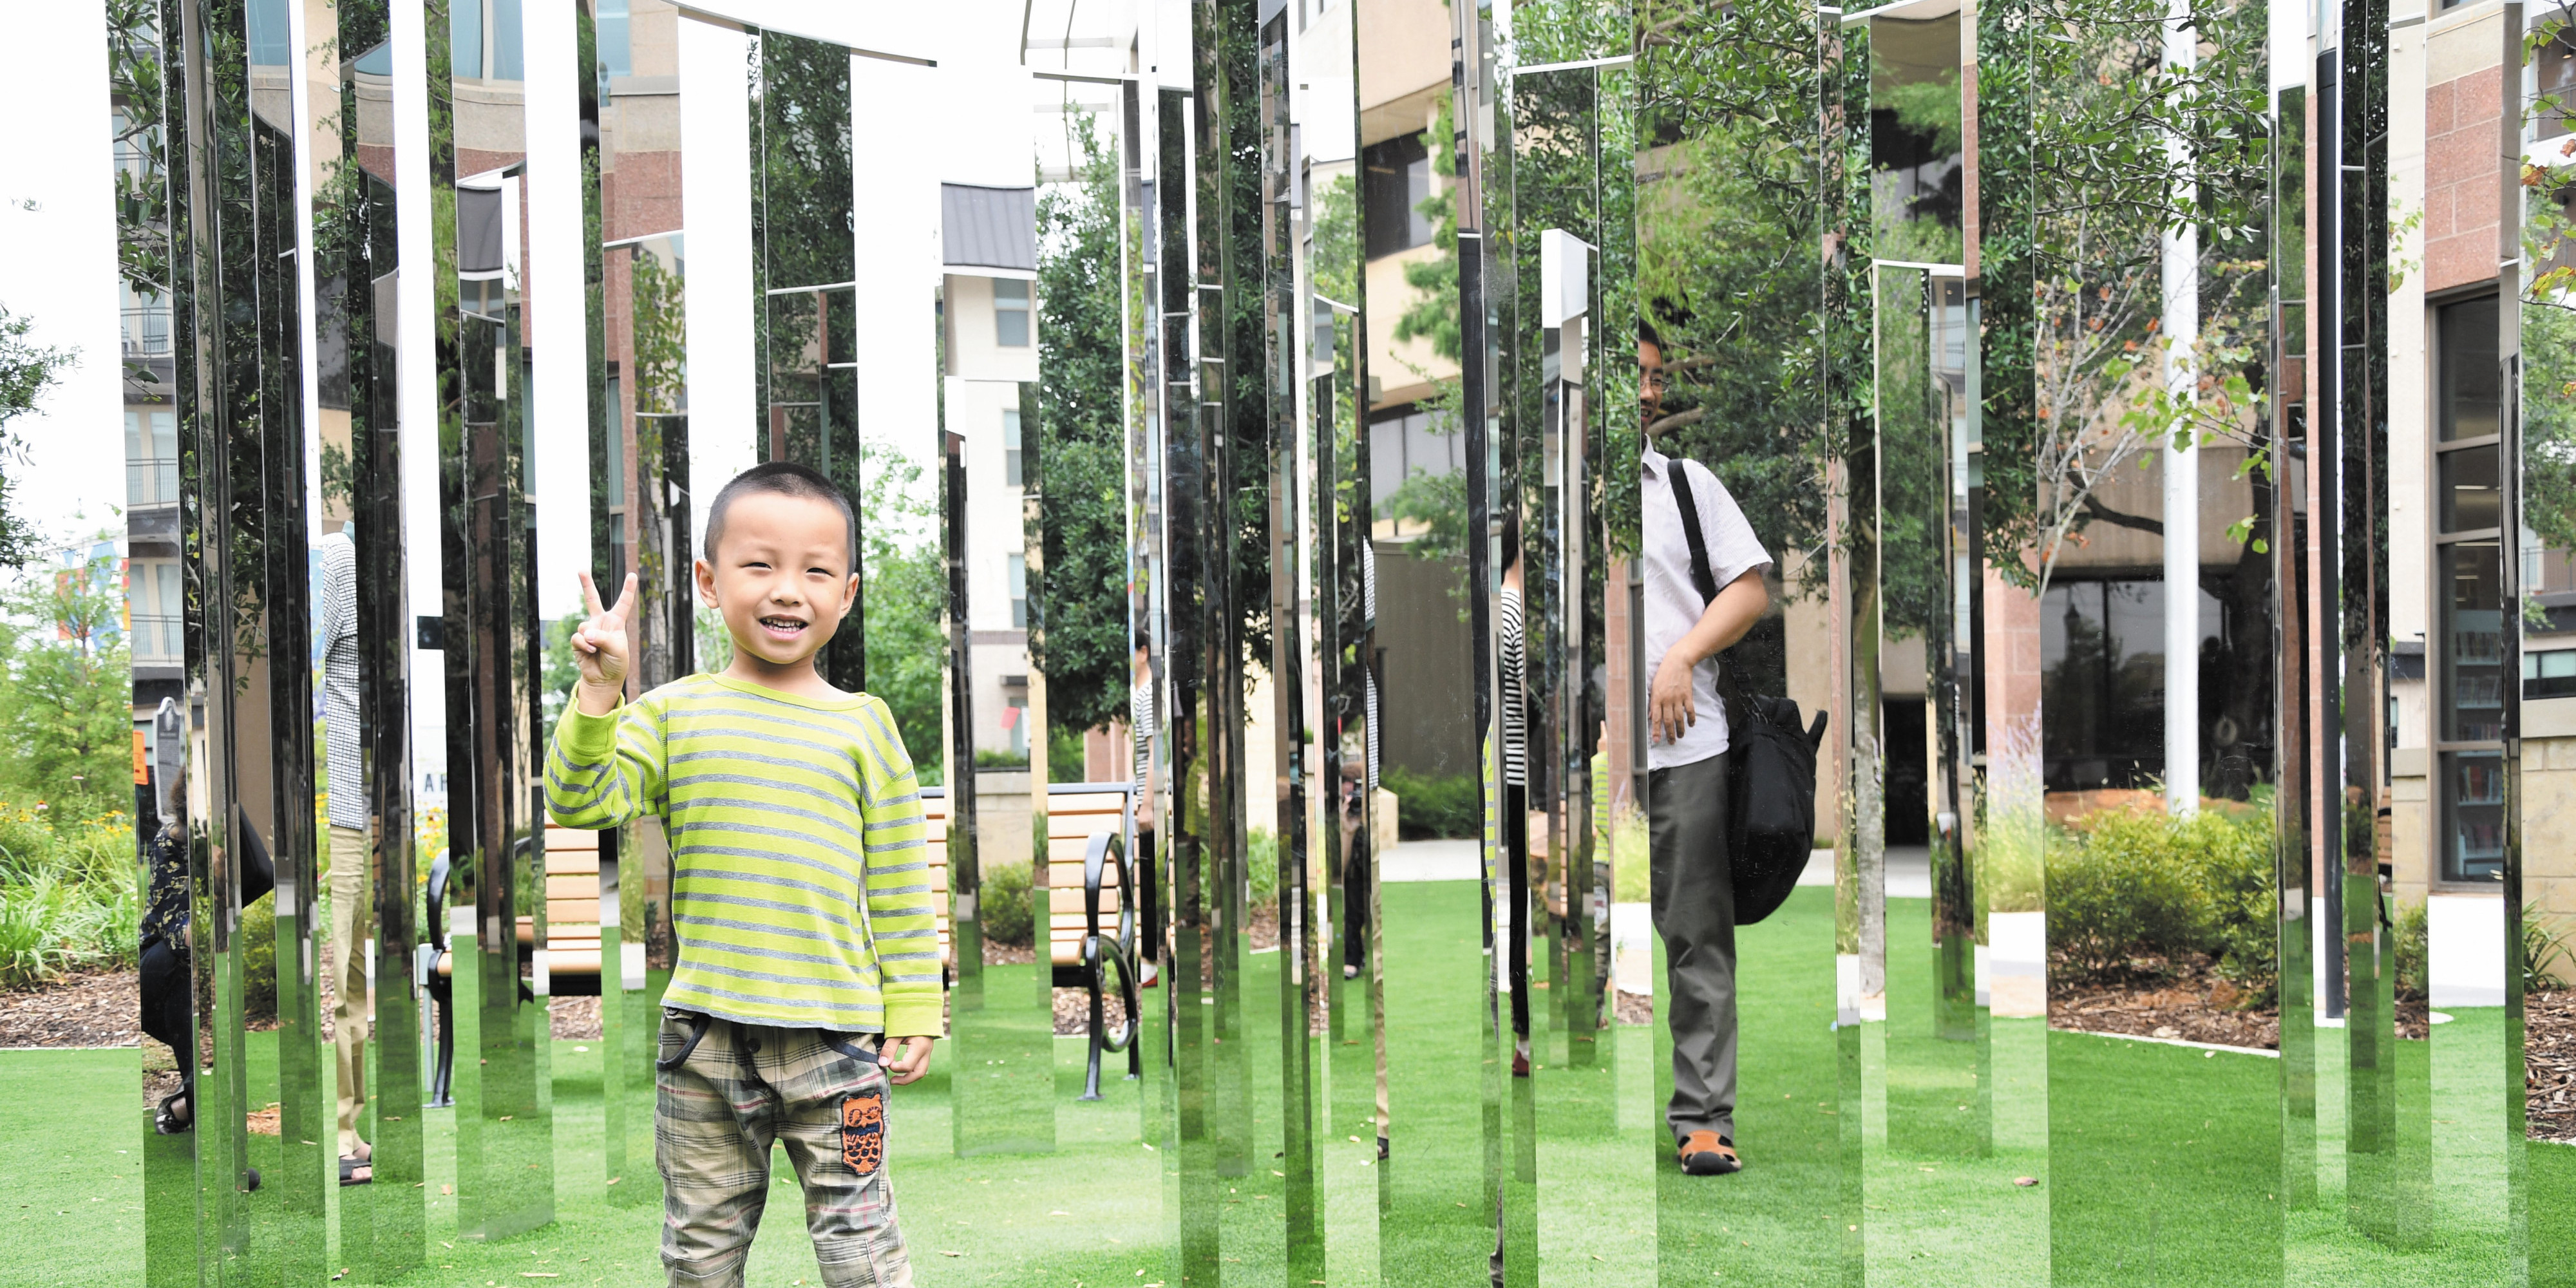 boy smiling in art structure